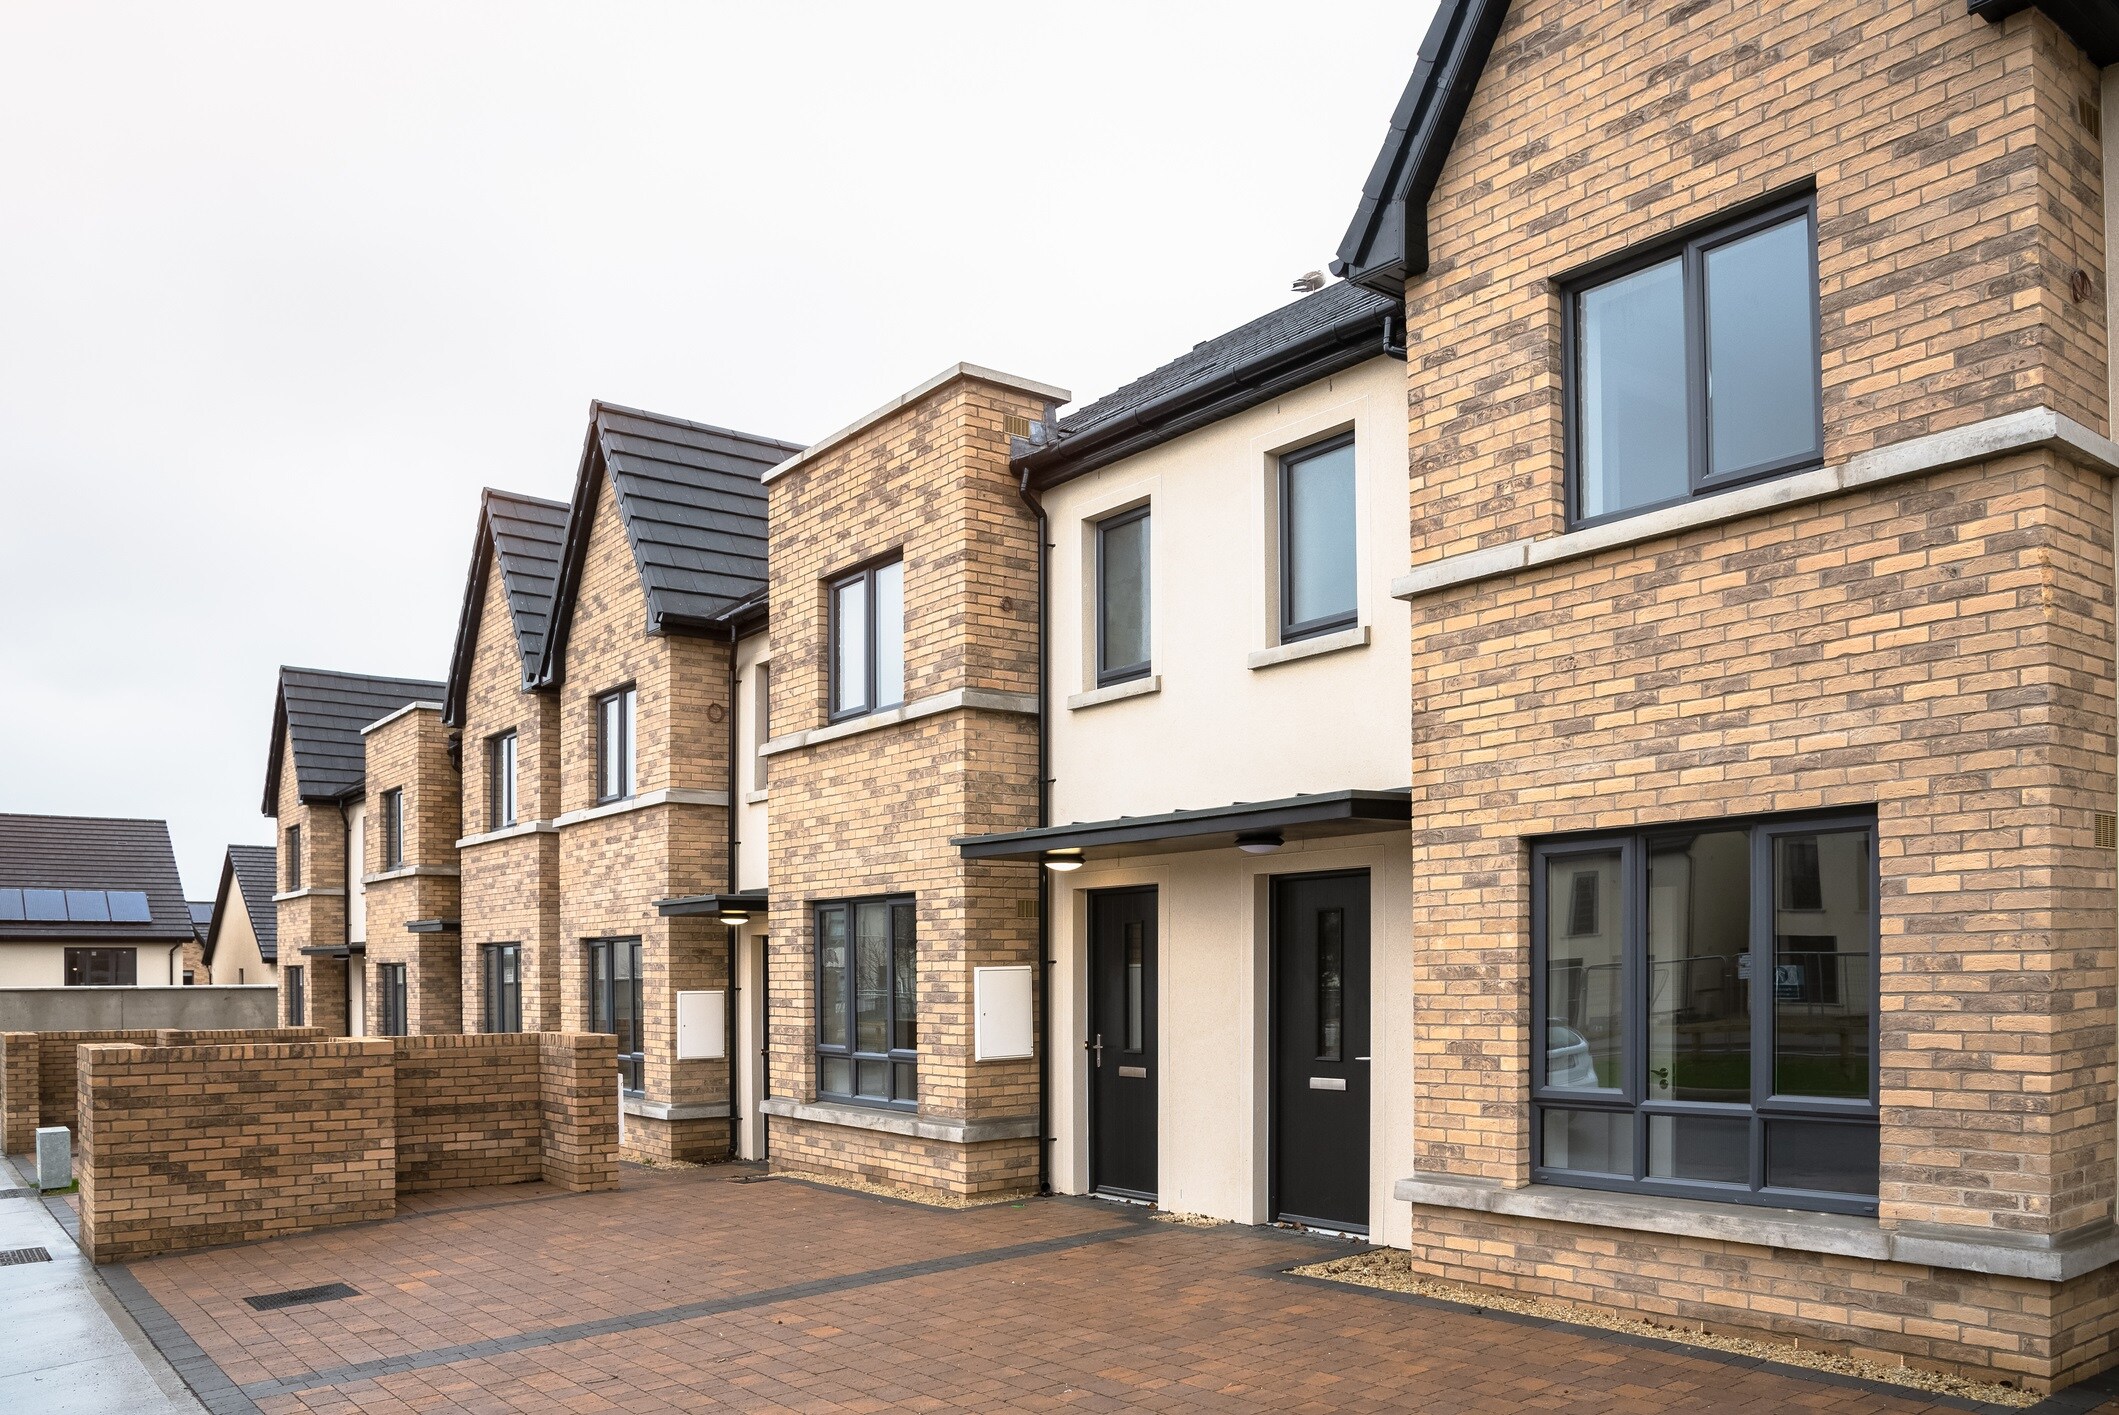 Implications of a Poor Indoor Climate Strategy for New Build Developments in the UK